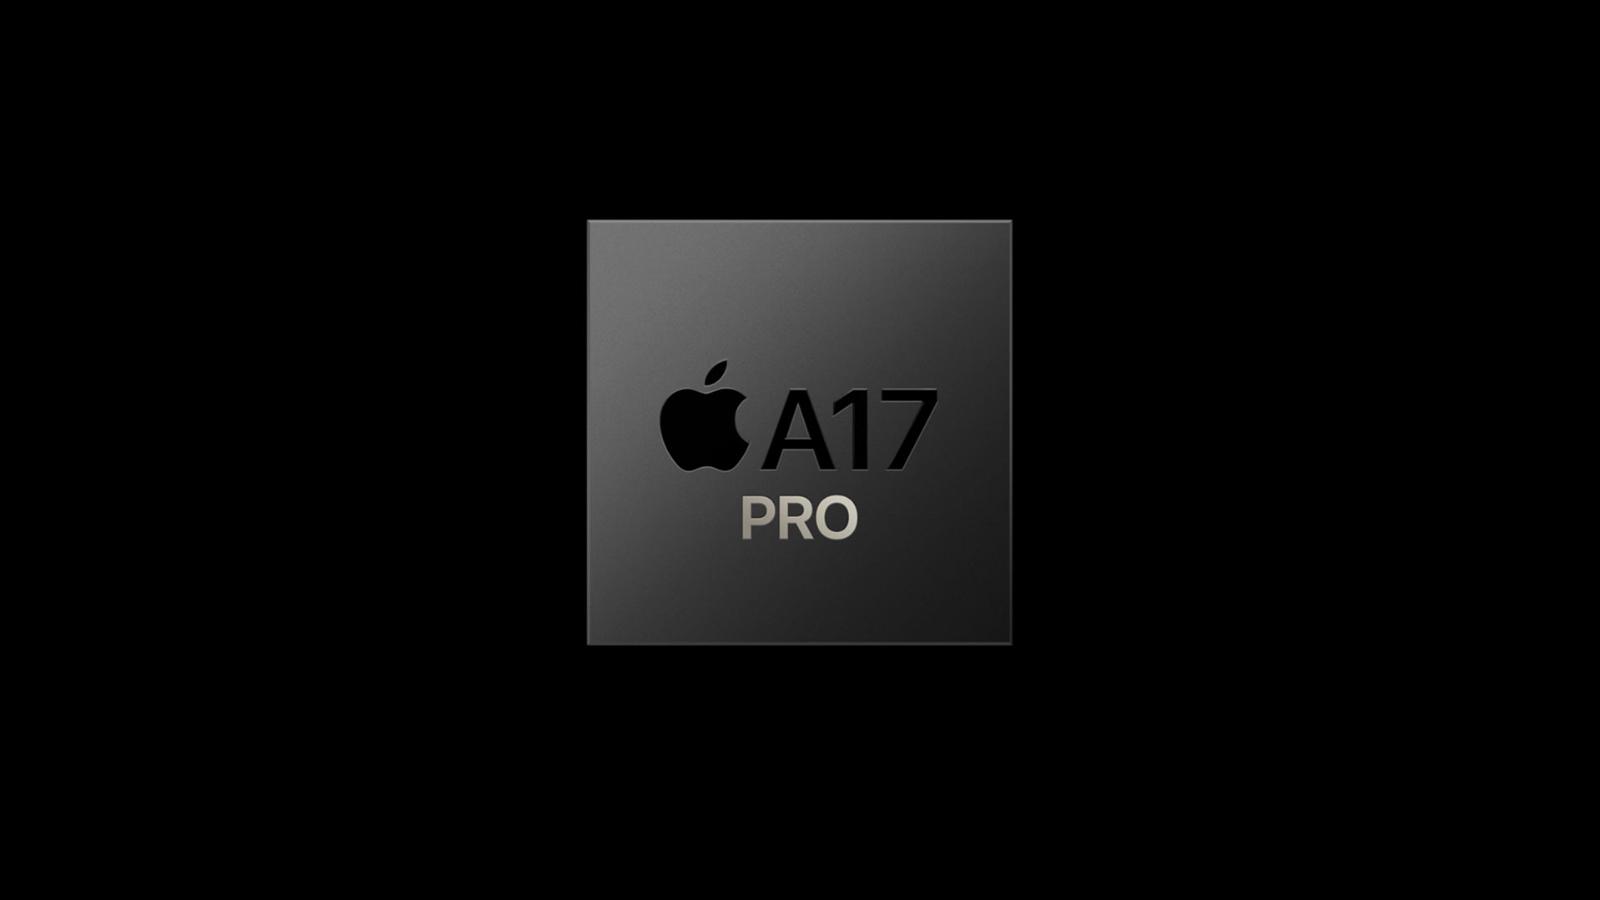 Apple launches the A17 Pro chip with a completely redesigned GPU